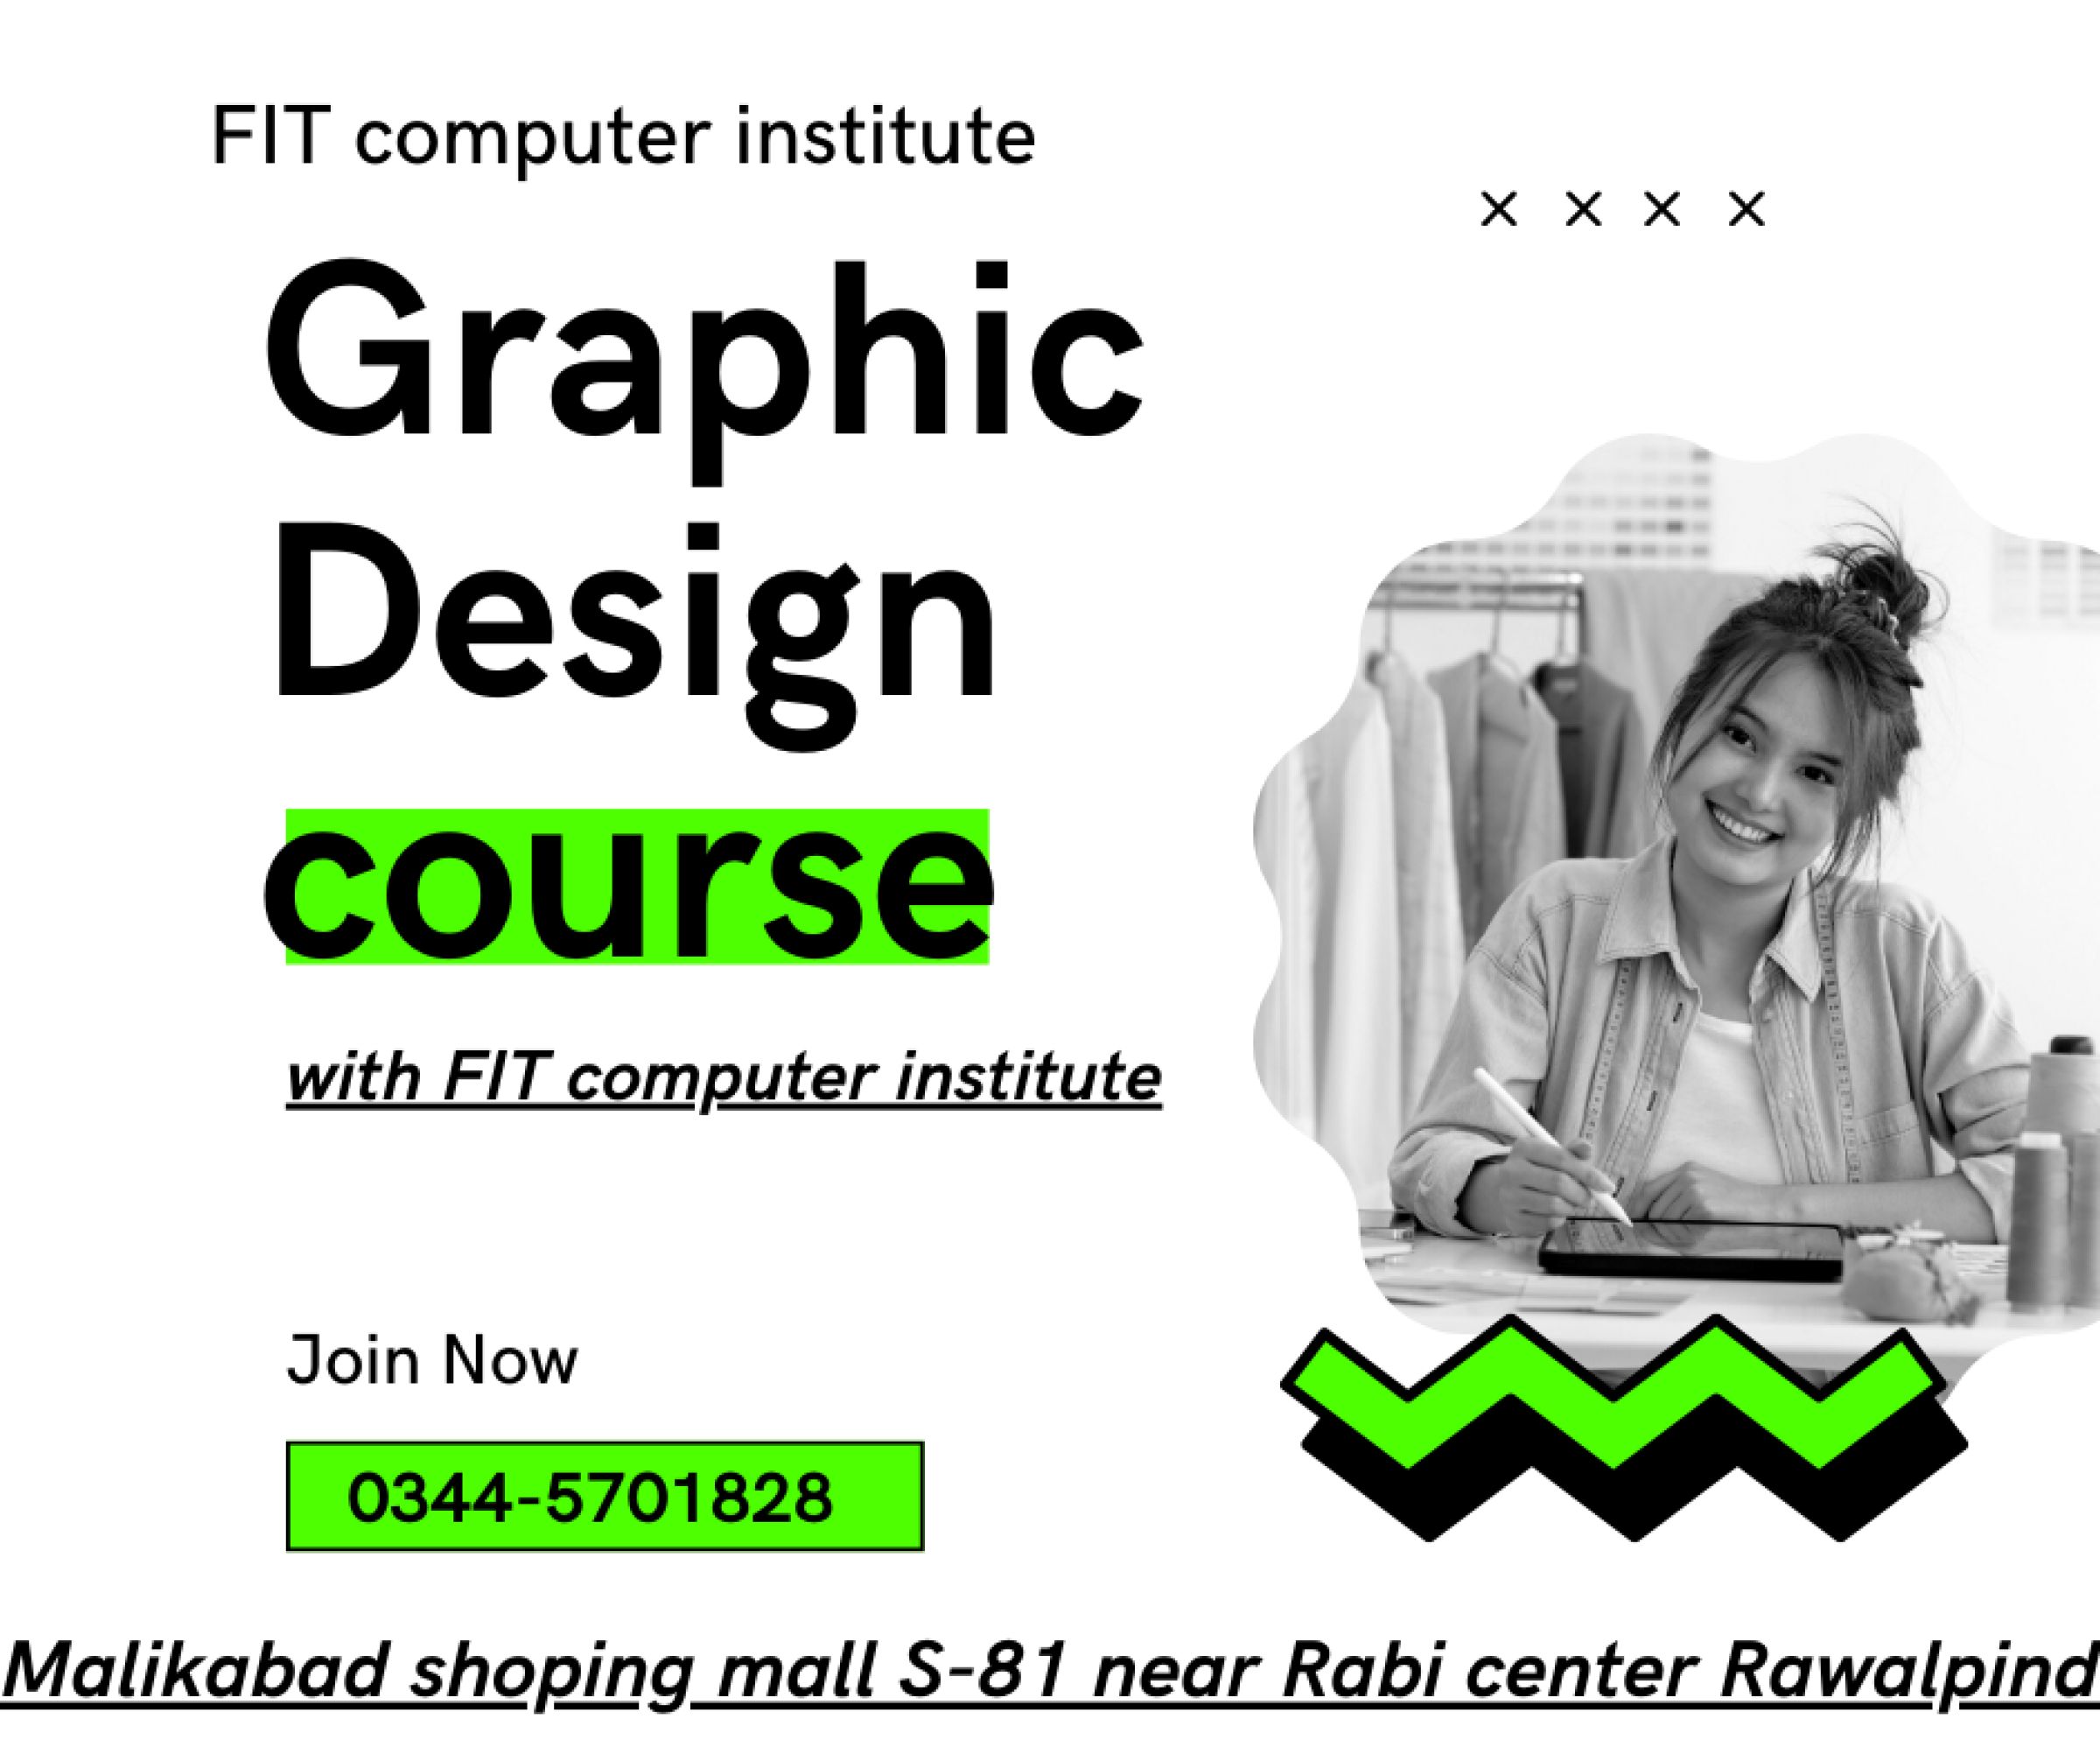 Graphic designing course by FITc